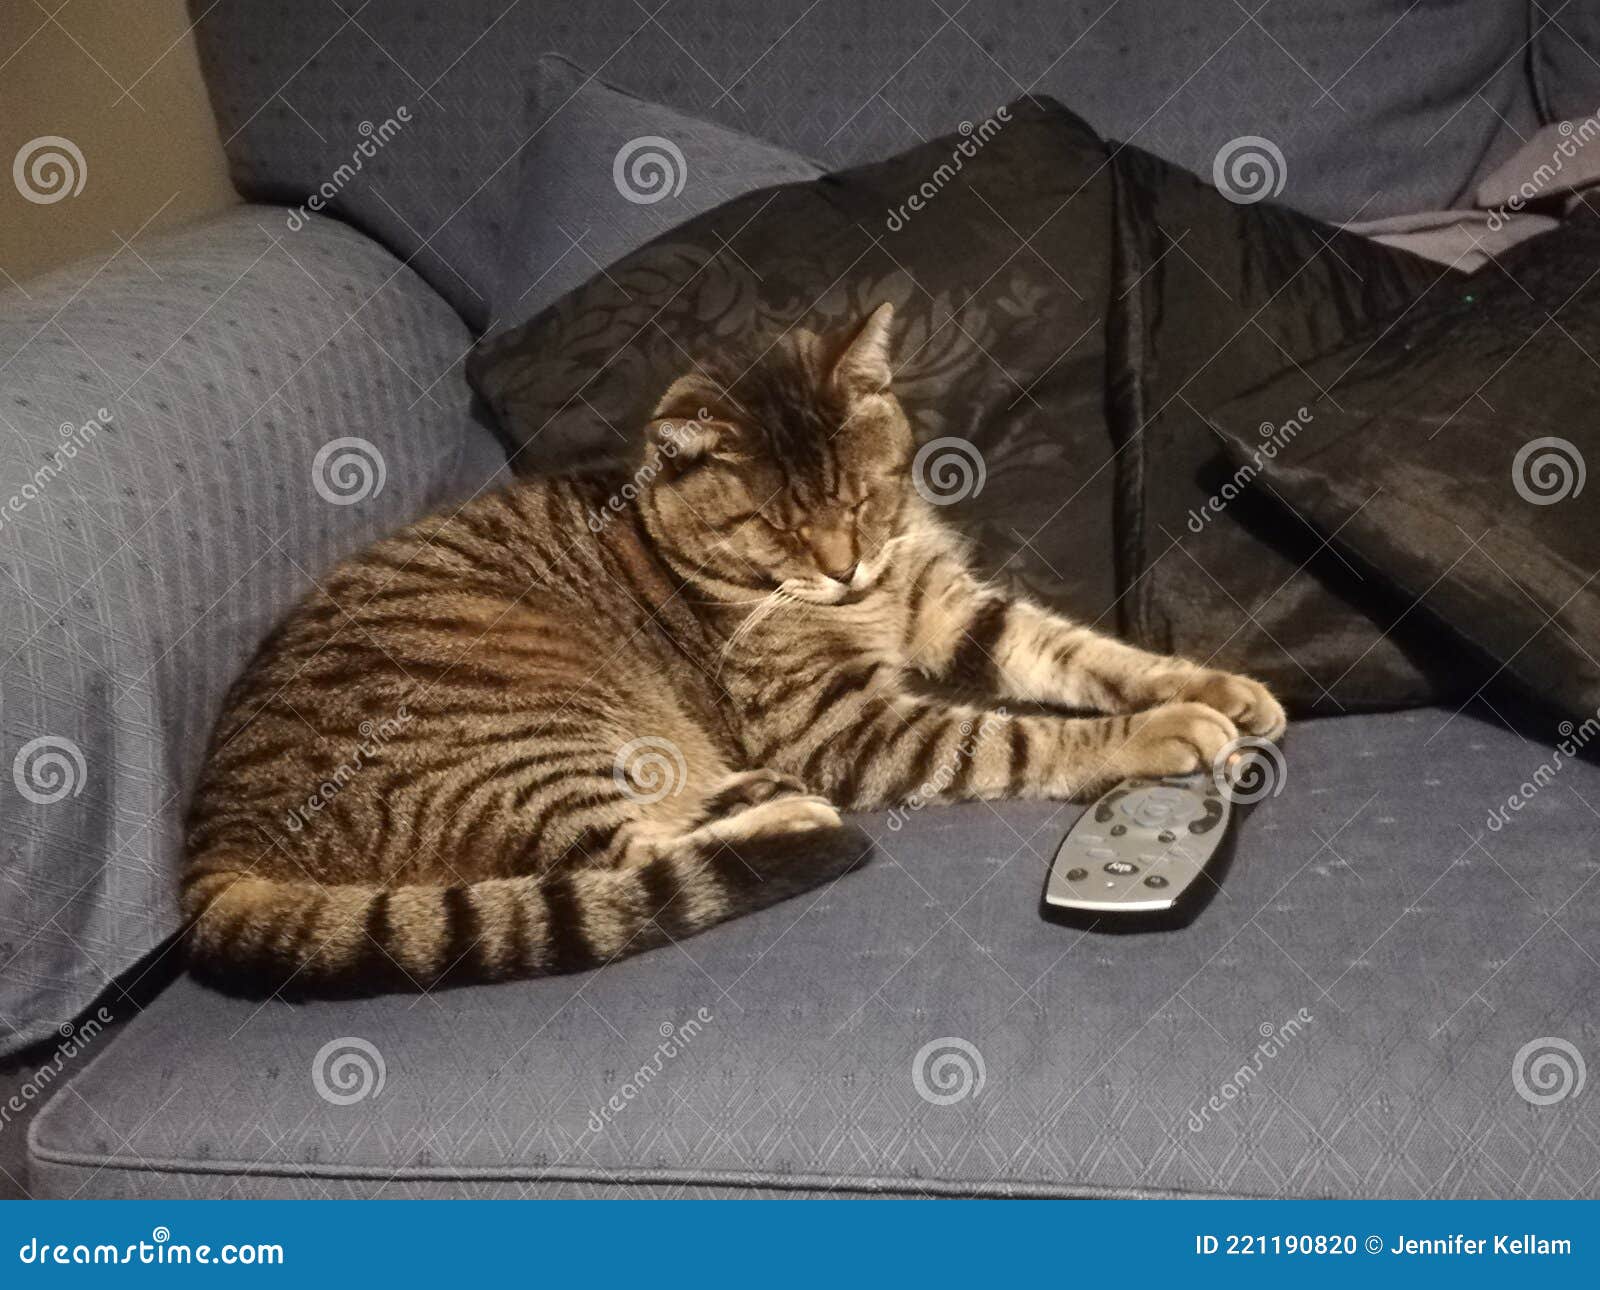 a cat sitting on a blue sofa holding a telly remote control